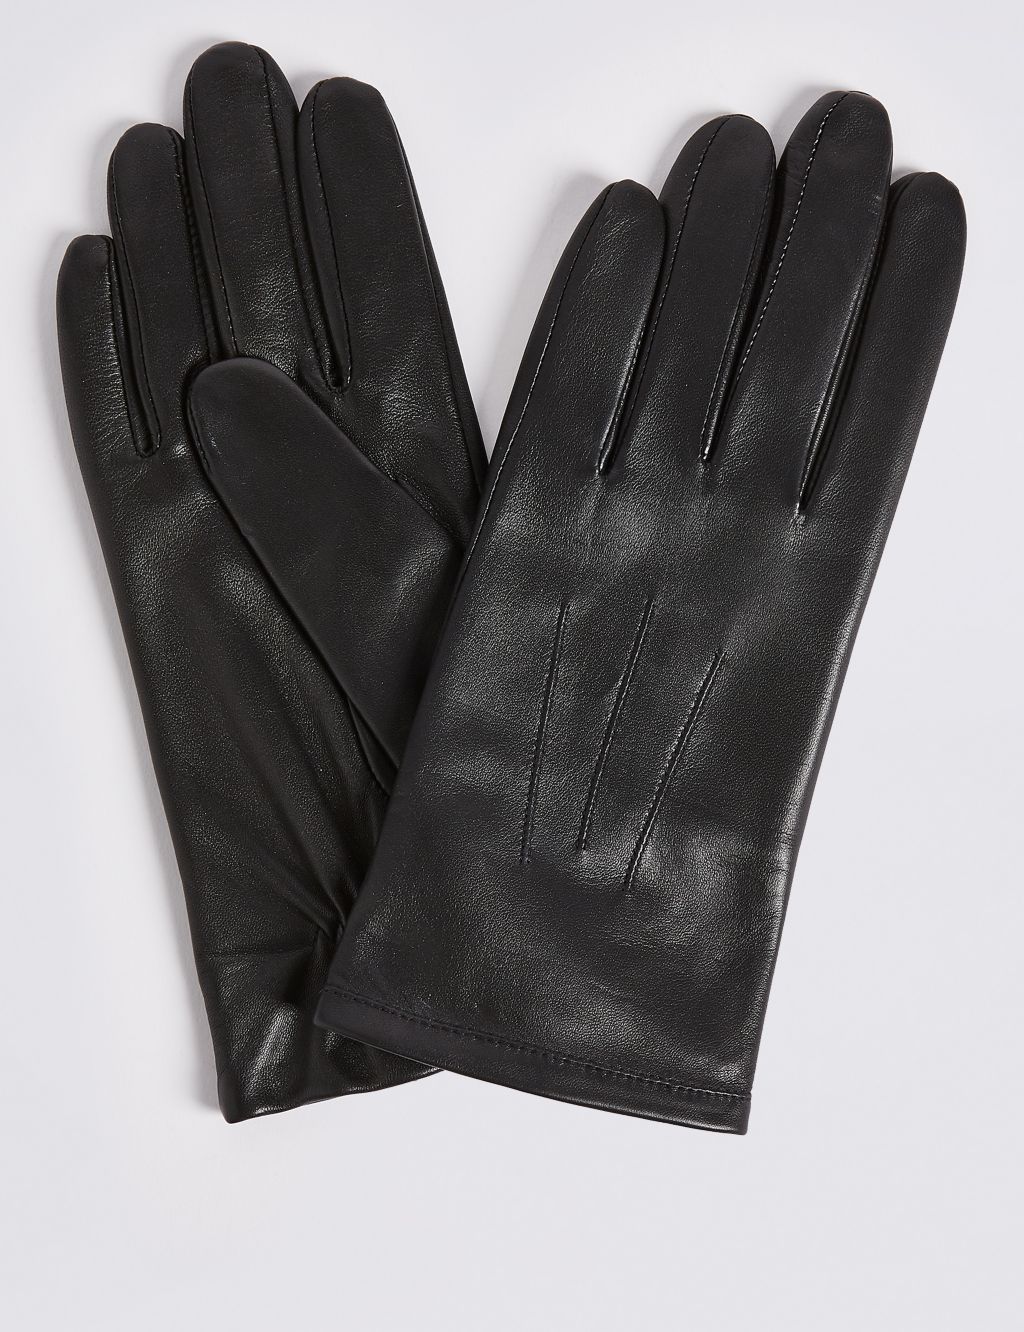 Leather Gloves image 1